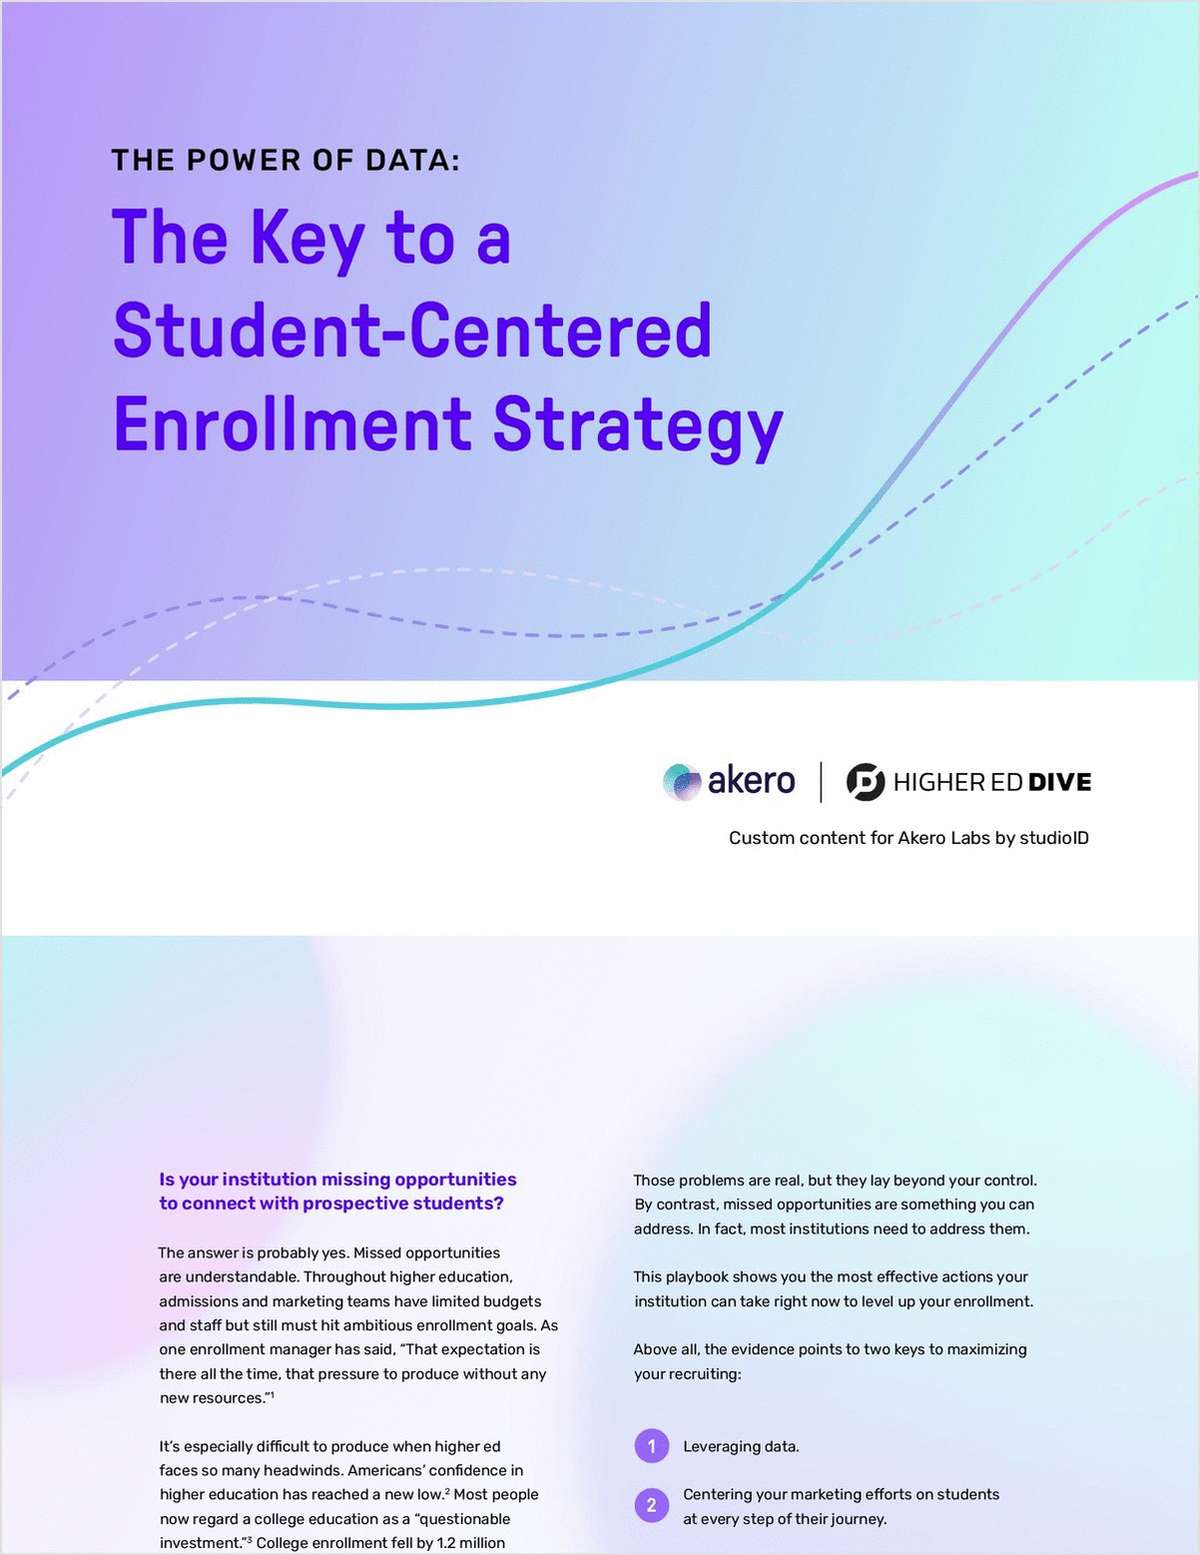 What Are the 2 Best Ways to Boost Your Institution's Enrollment?